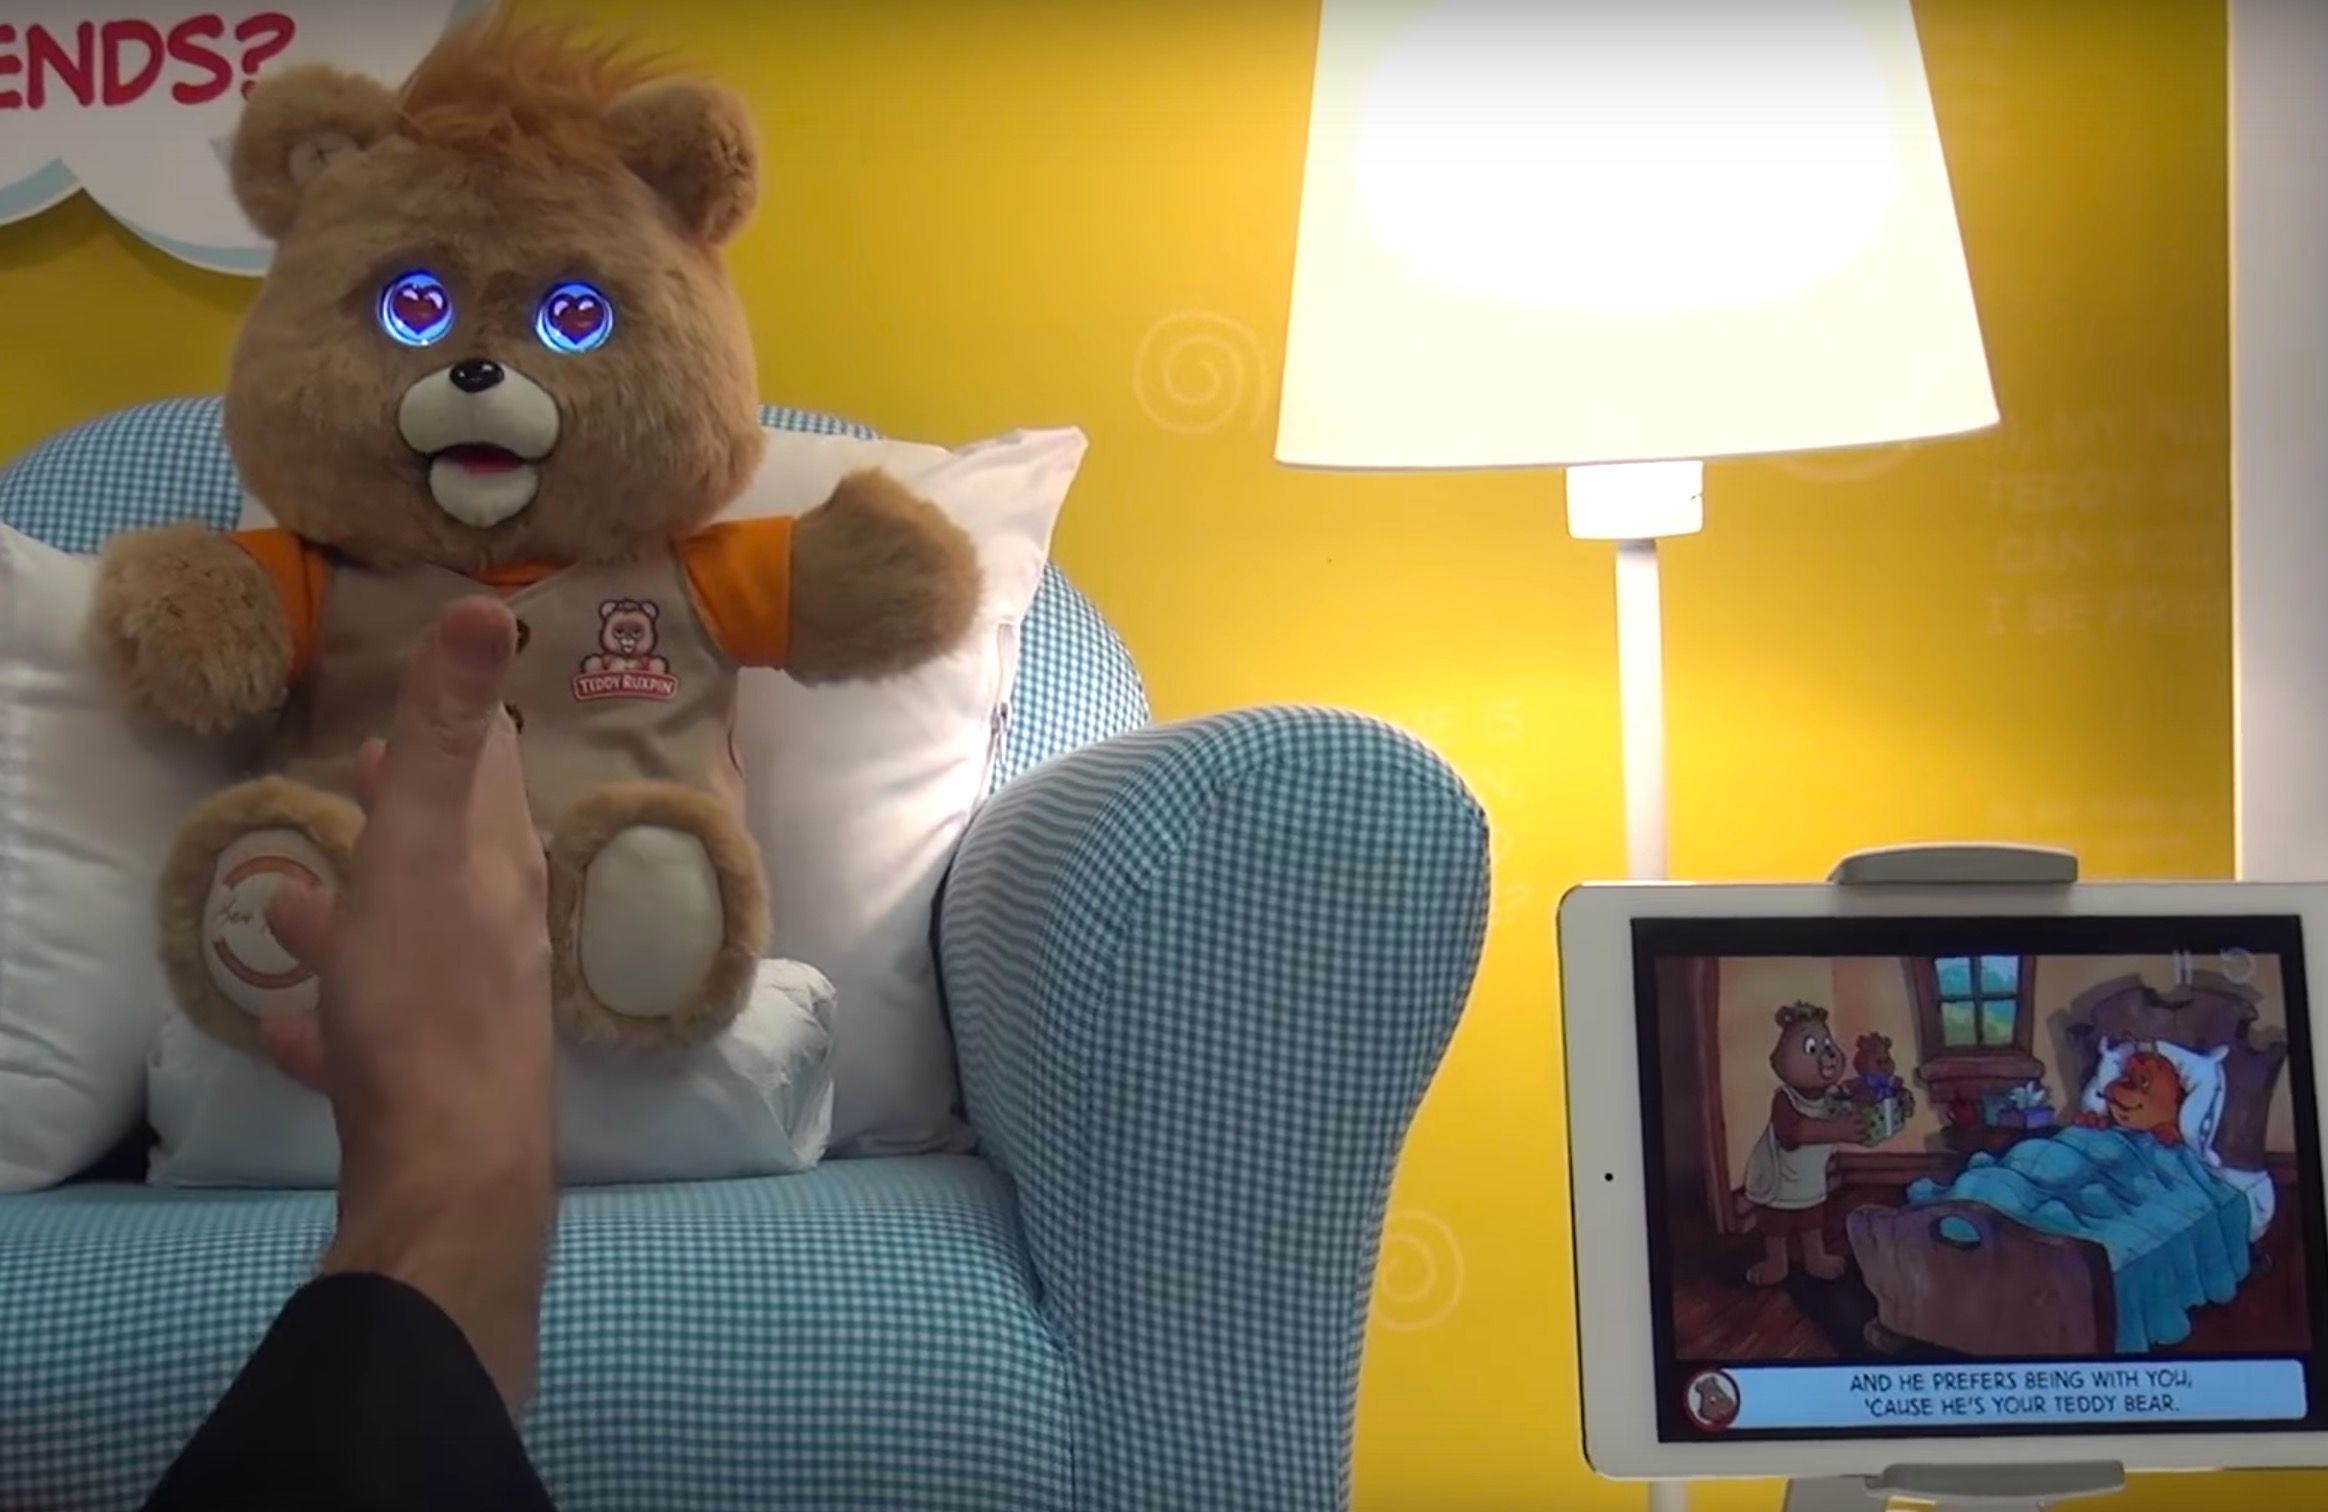 80s kids rejoice teddy ruxpin is back with lcd eyes and more image 1